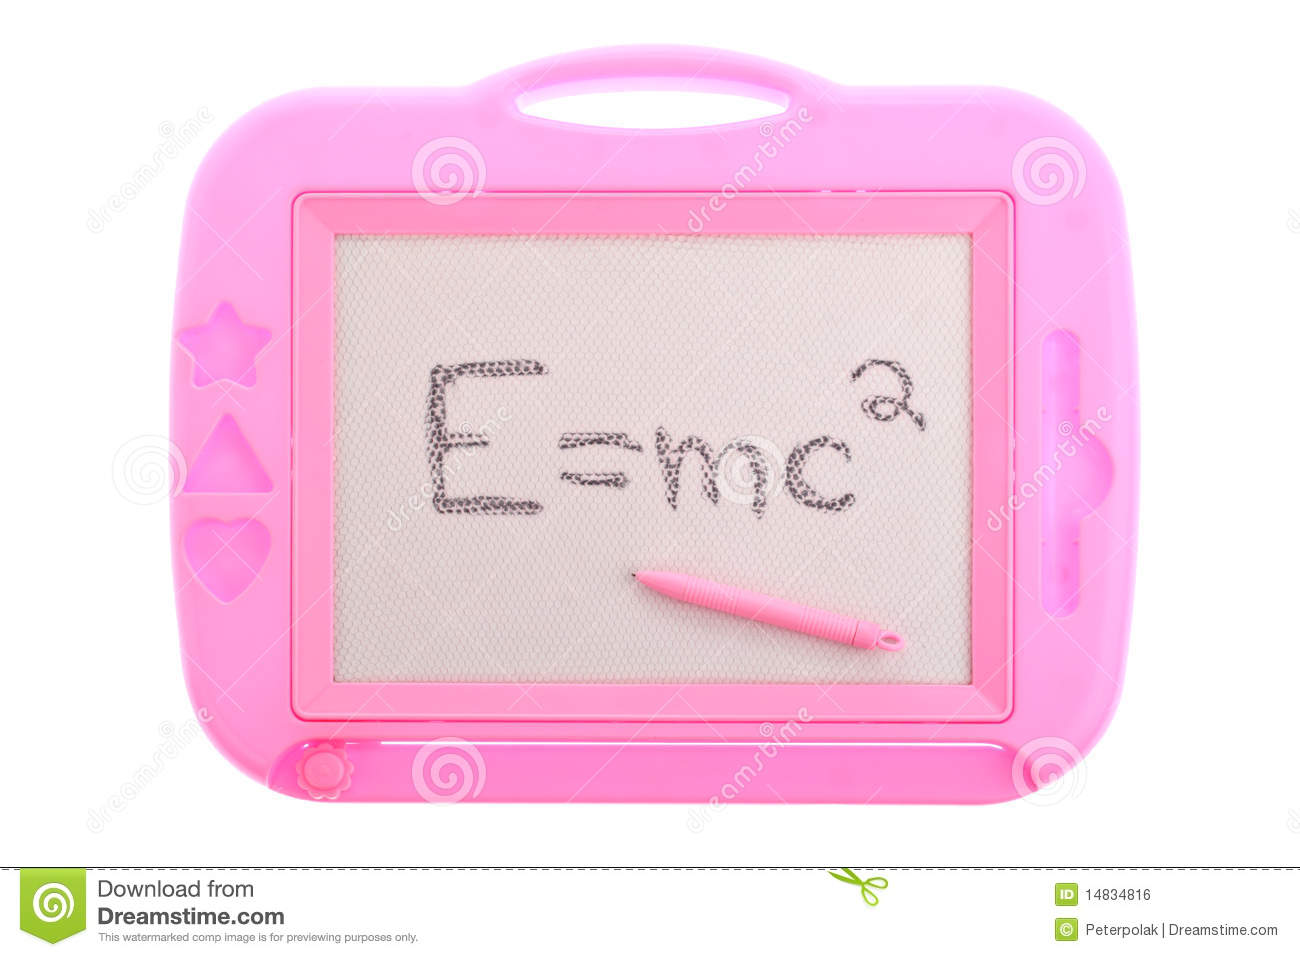 Mc2 Written On A Pink Child S Toy Magnetic Learning Board Isolated